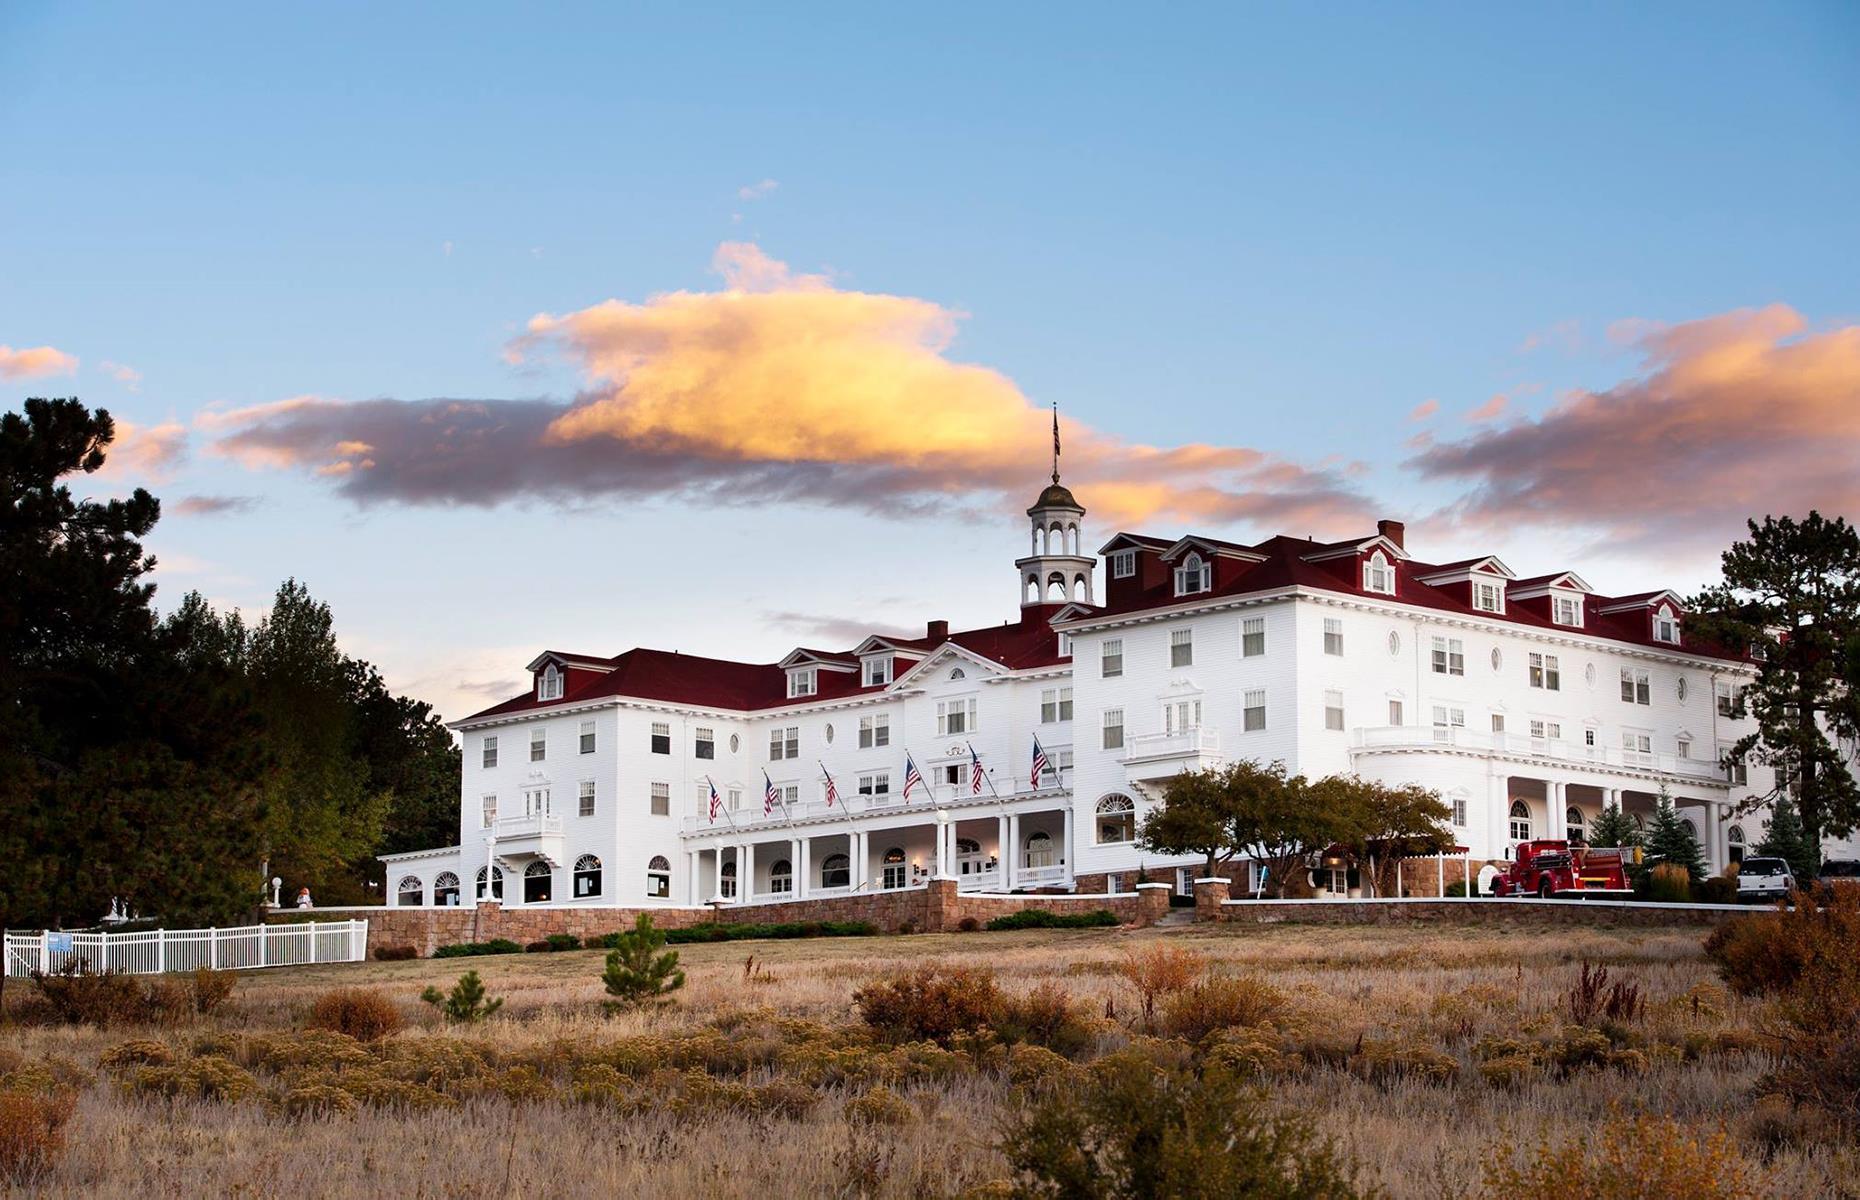 <p>The <a href="https://www.stanleyhotel.com">Stanley Hotel</a> is synonymous with spooks and spirits and is famous as the inspiration for creepy Stephen King novel <em>The Shining</em> (1977). Guests can get to grips with the hotel's ghostly goings-on on <a href="https://www.stanleyhotel.com/night-tour.html">a night tour</a>, which takes visitors into some of the place's creepiest corners. Room 217 – dubbed The Stephen King Suite, since it's where the writer stayed – is the place most readily associated with paranormal activity. It's said to be home to the ghost of Elizabeth Wilson, a chambermaid injured in an explosion, while spectral children have apparently been seen flitting around the halls of the fourth floor.</p>